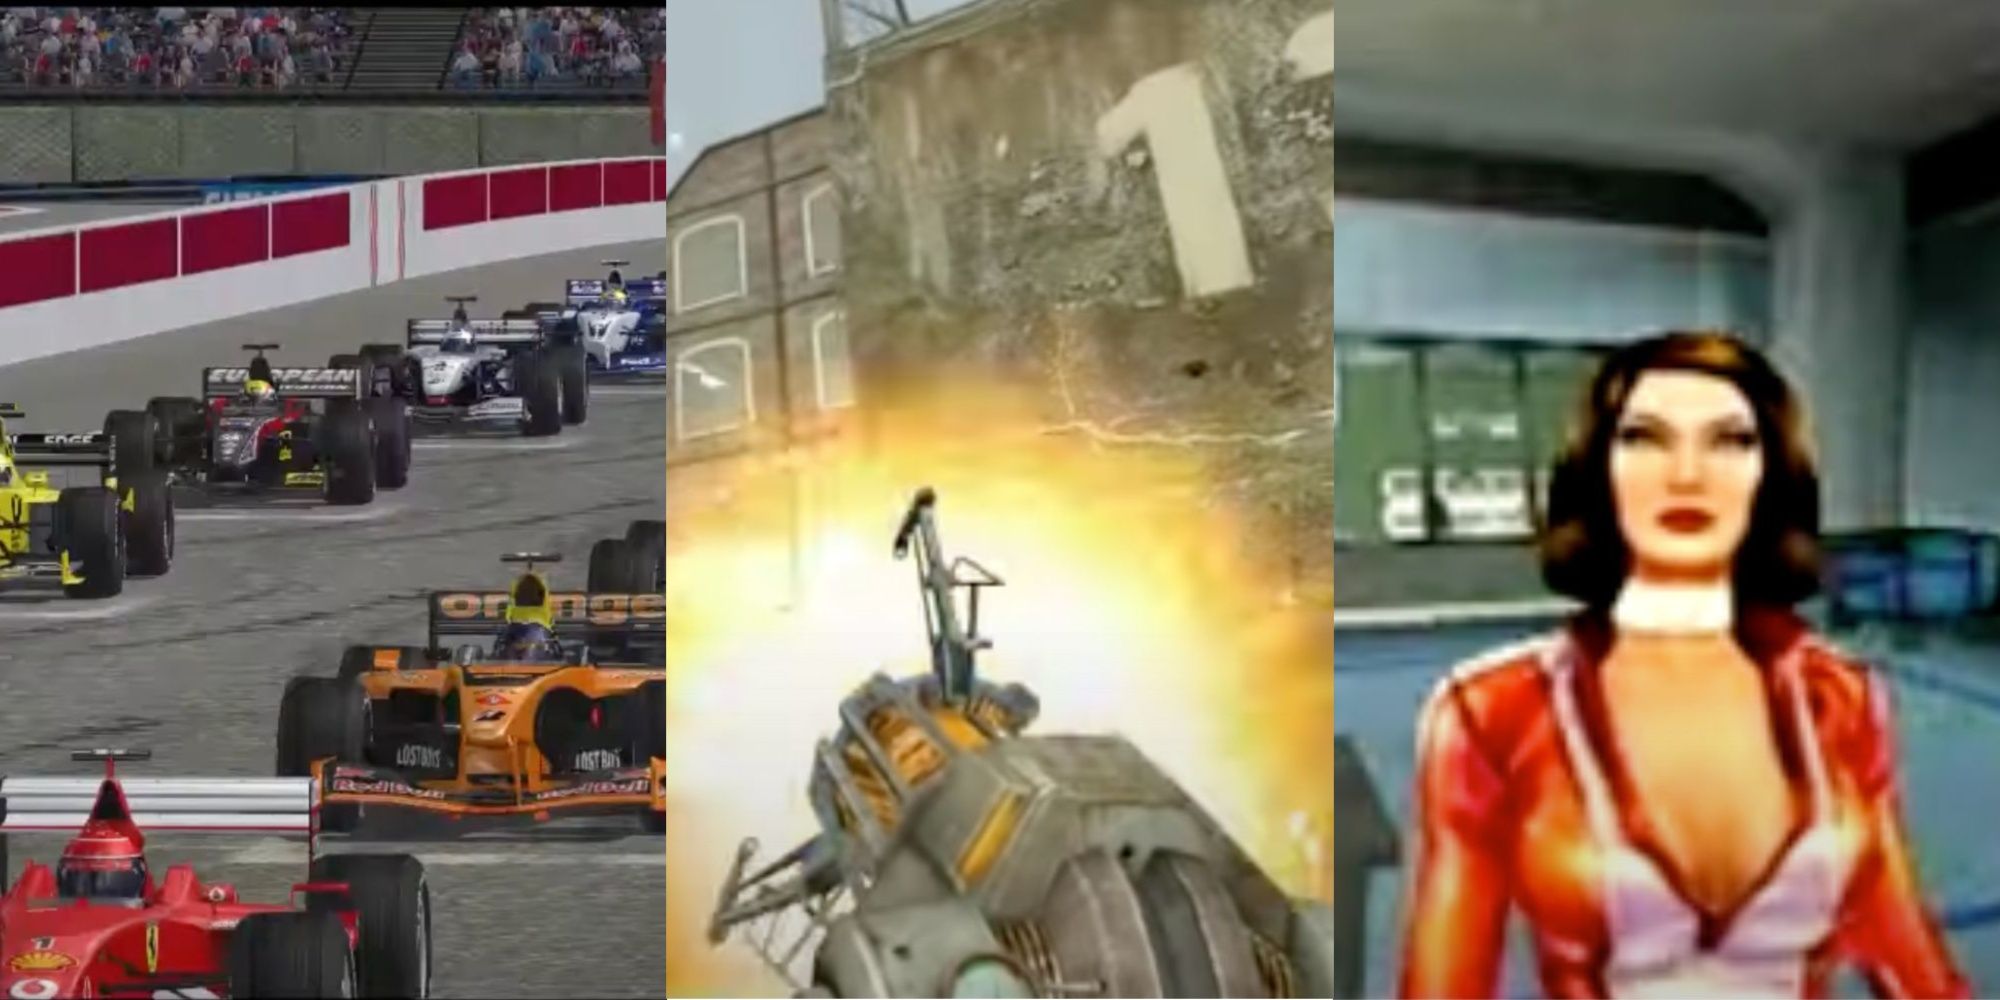 PC Games that Deserve Remakes split image including F1 and Half Life